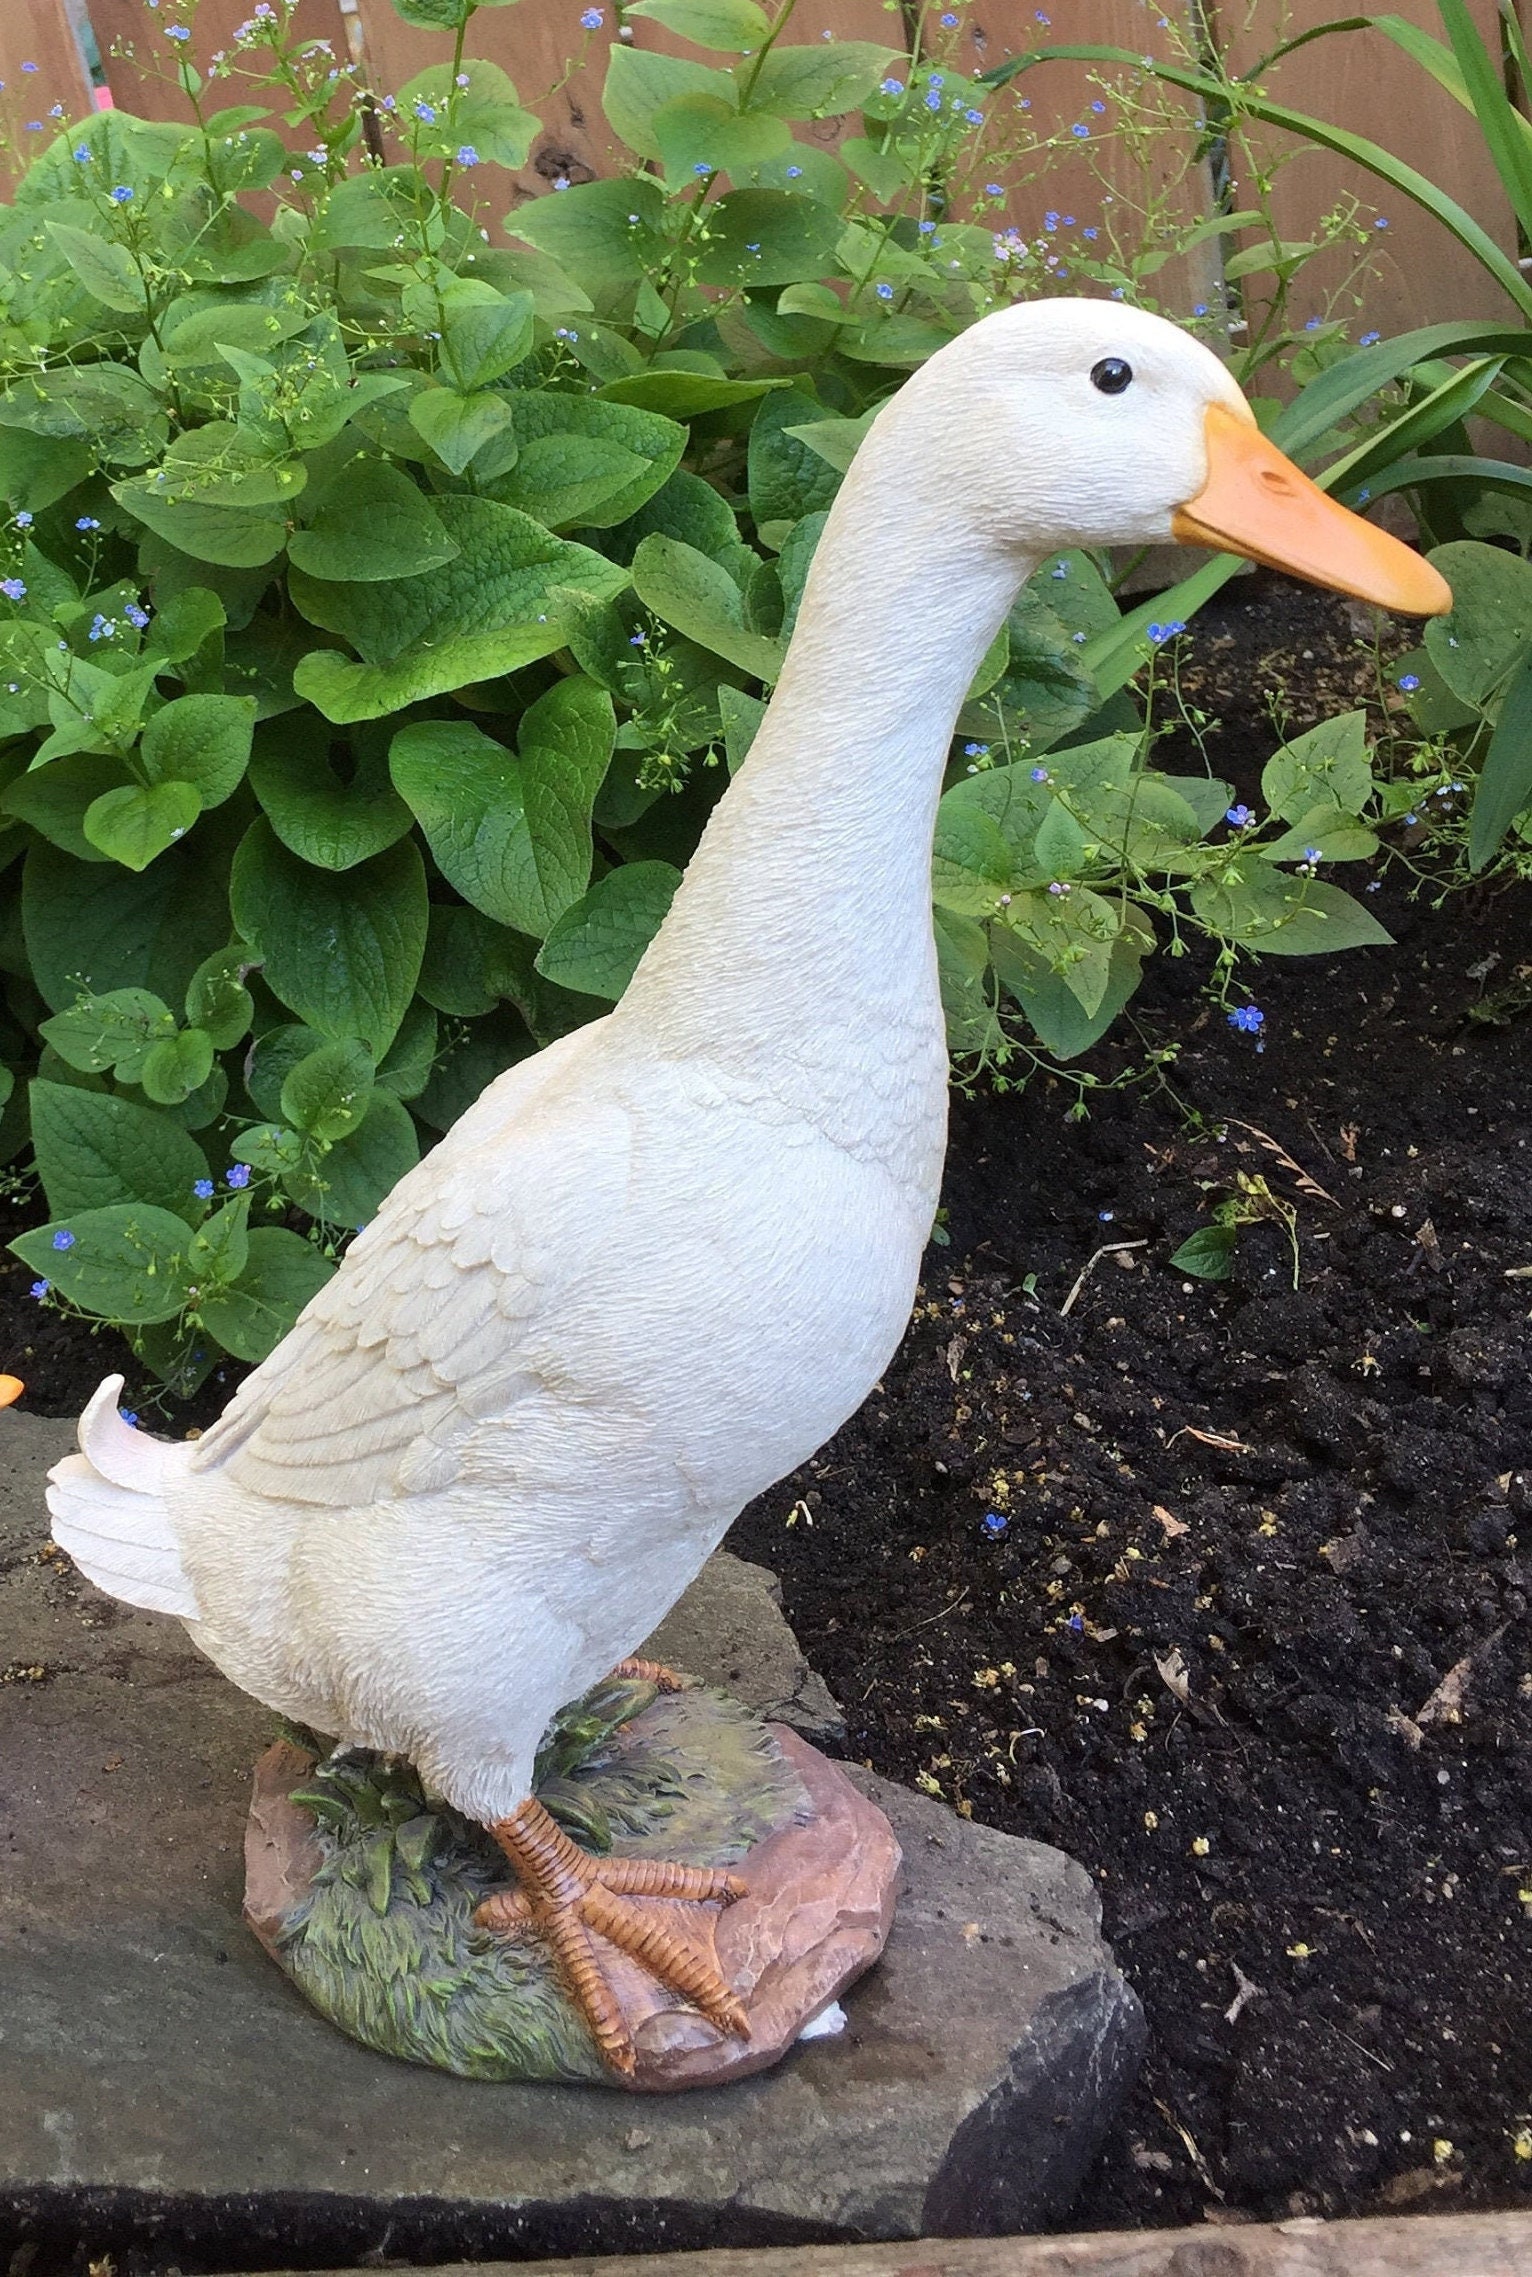 Hot Selling Customized Color Duck Figurine Garden Home Decoration